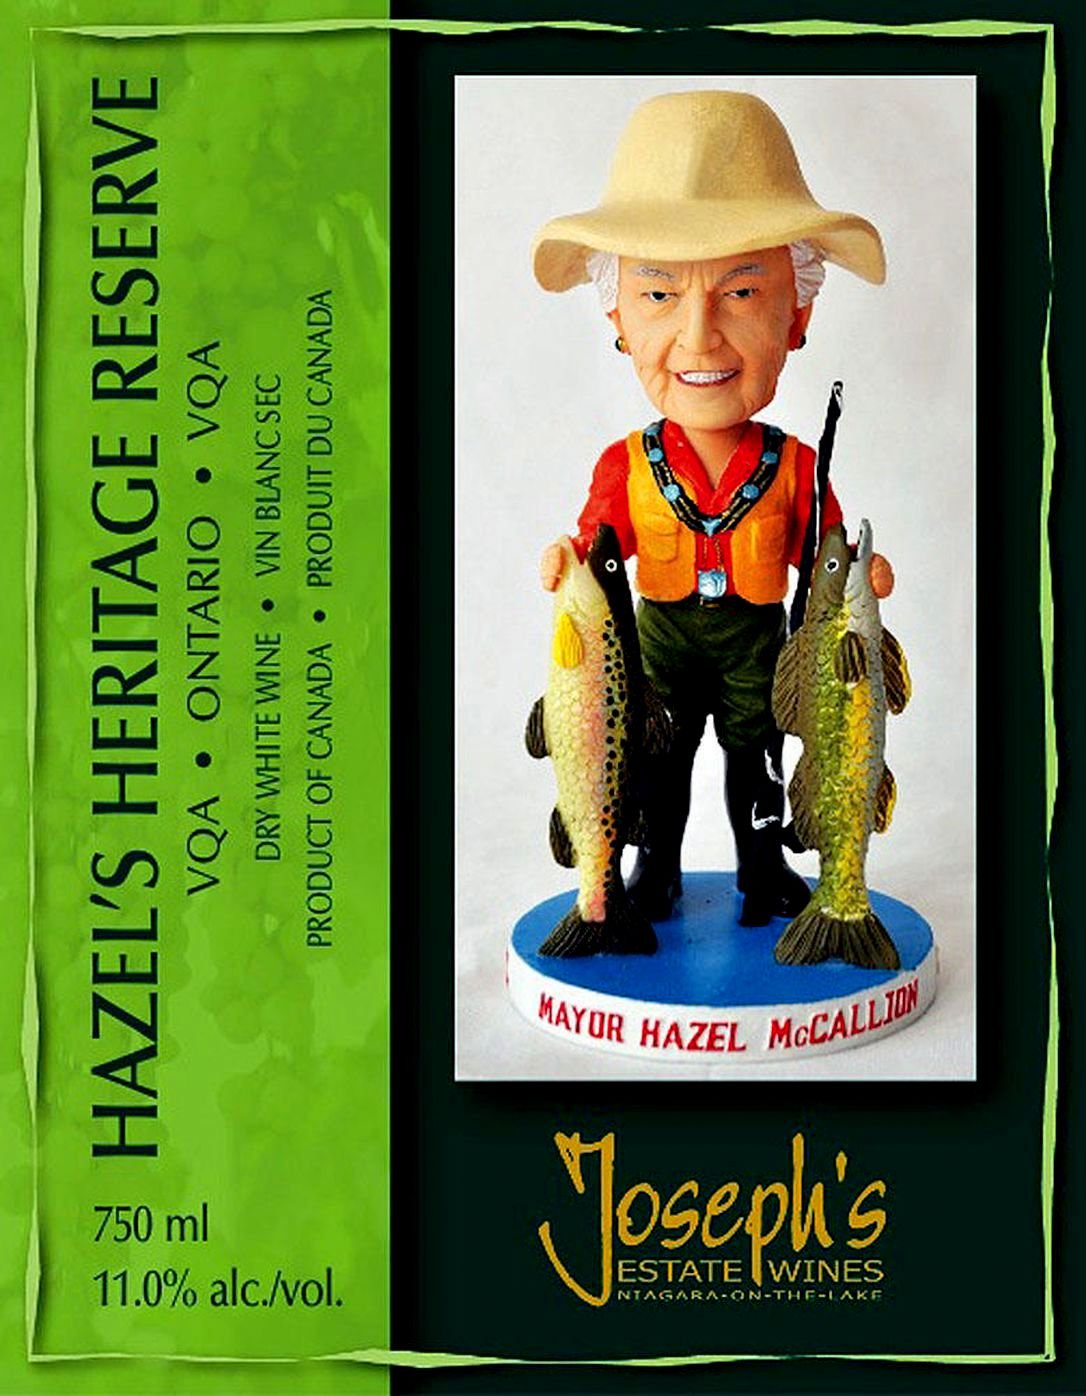 hazel_vintage_is_no_vinordinaire.jpeg Google image from https://www.thestar.com/news/gta/2010/02/04/winery_honours_hazel_mccallion_with_private_labels.html